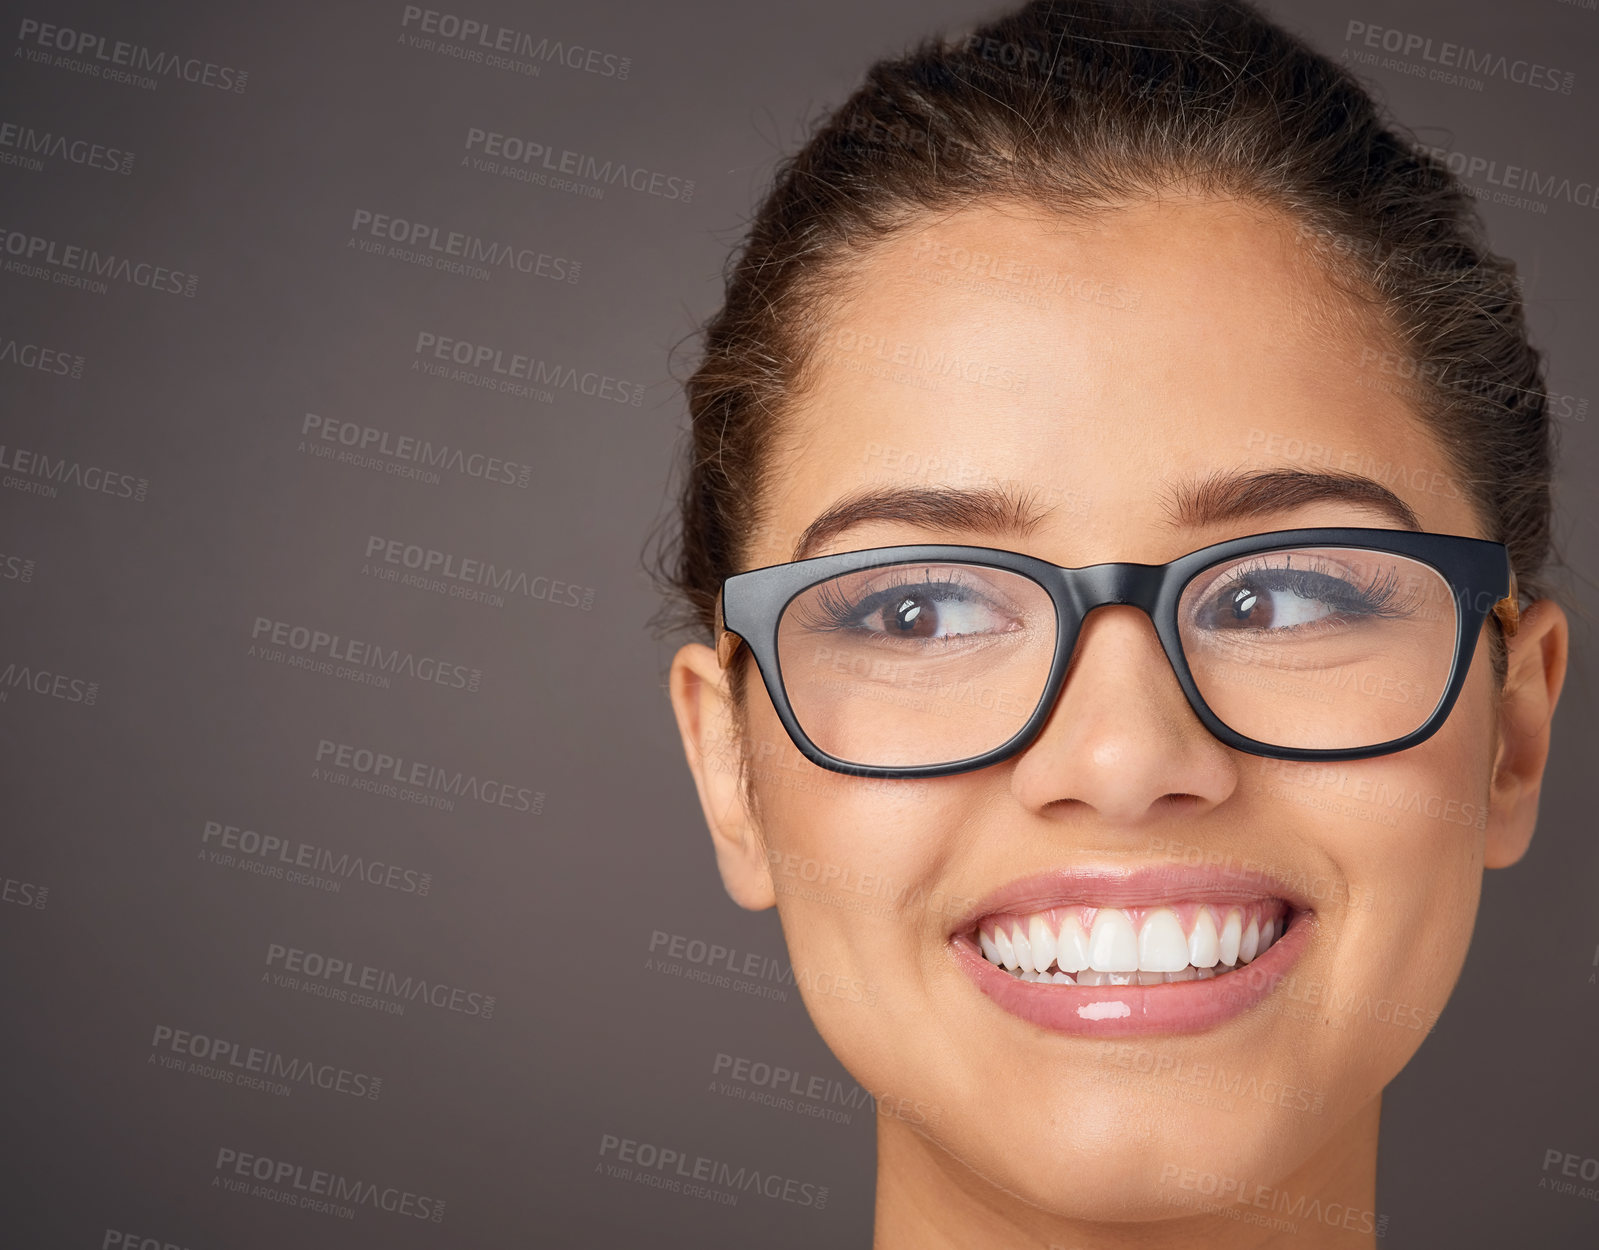 Buy stock photo Studio shot of a beautiful young woman wearing glasses against a gray background